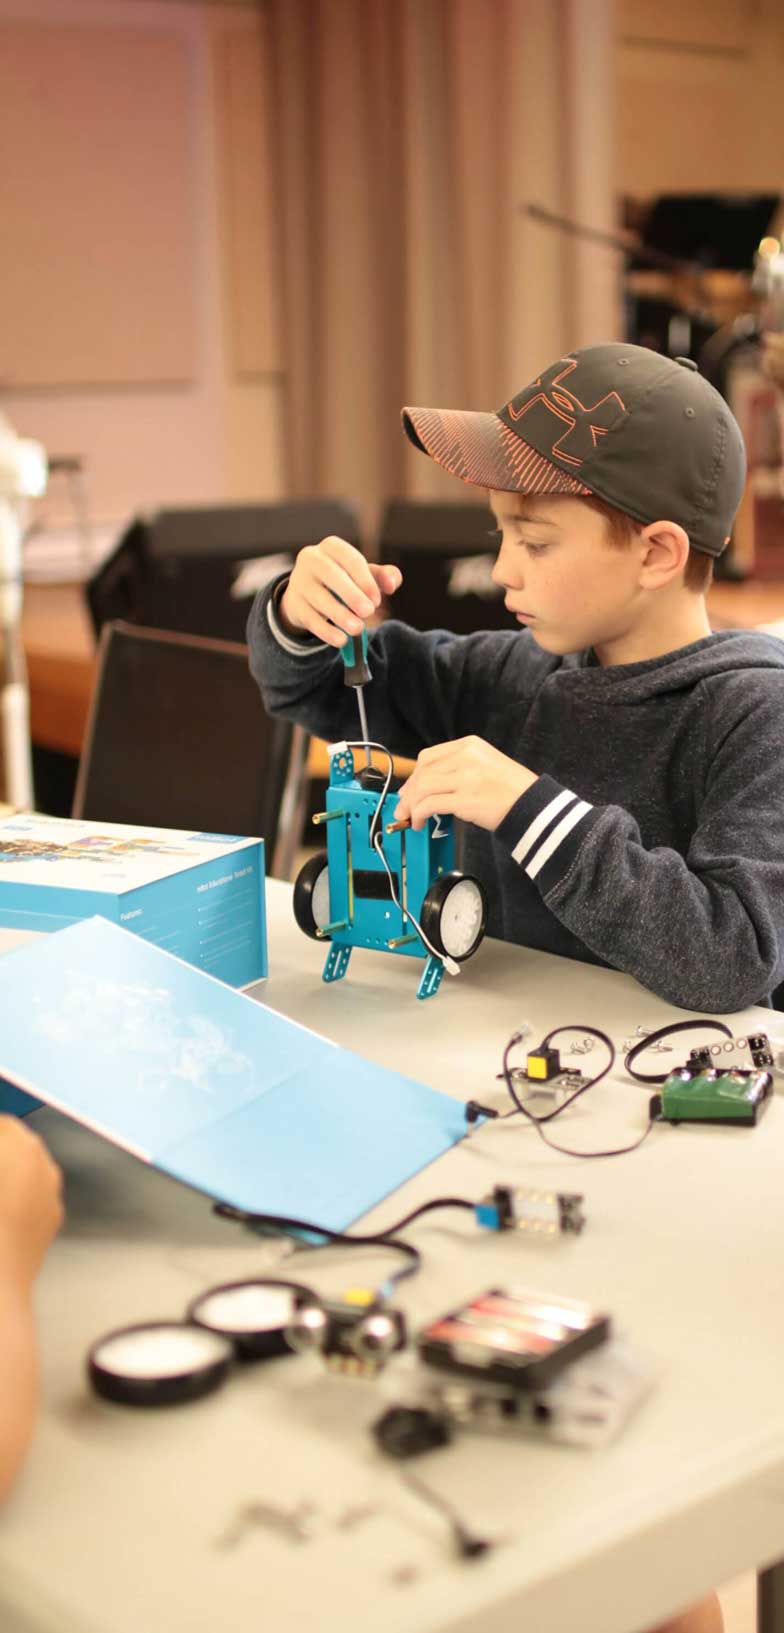 Young boy assembling an Mbot with a screw driver